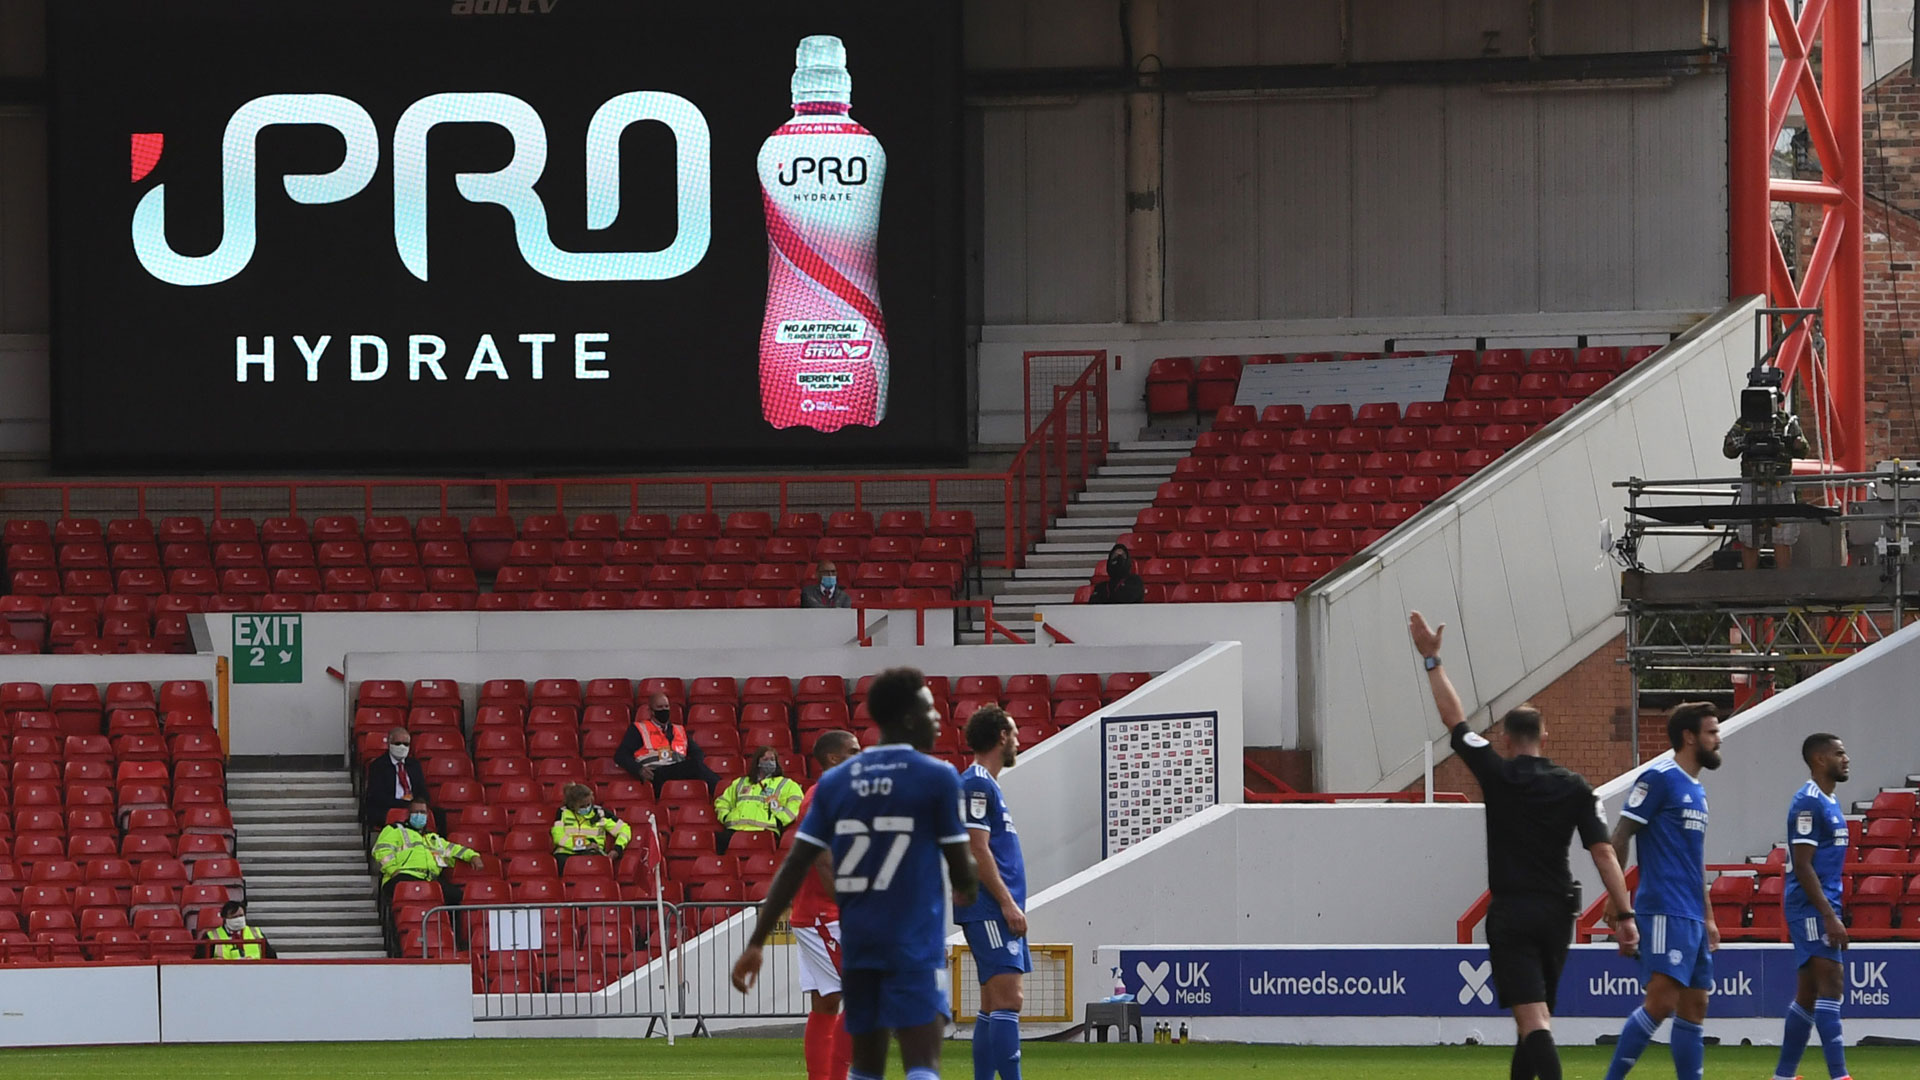 iPro link up with the Bluebirds as Official Hydration Partner...